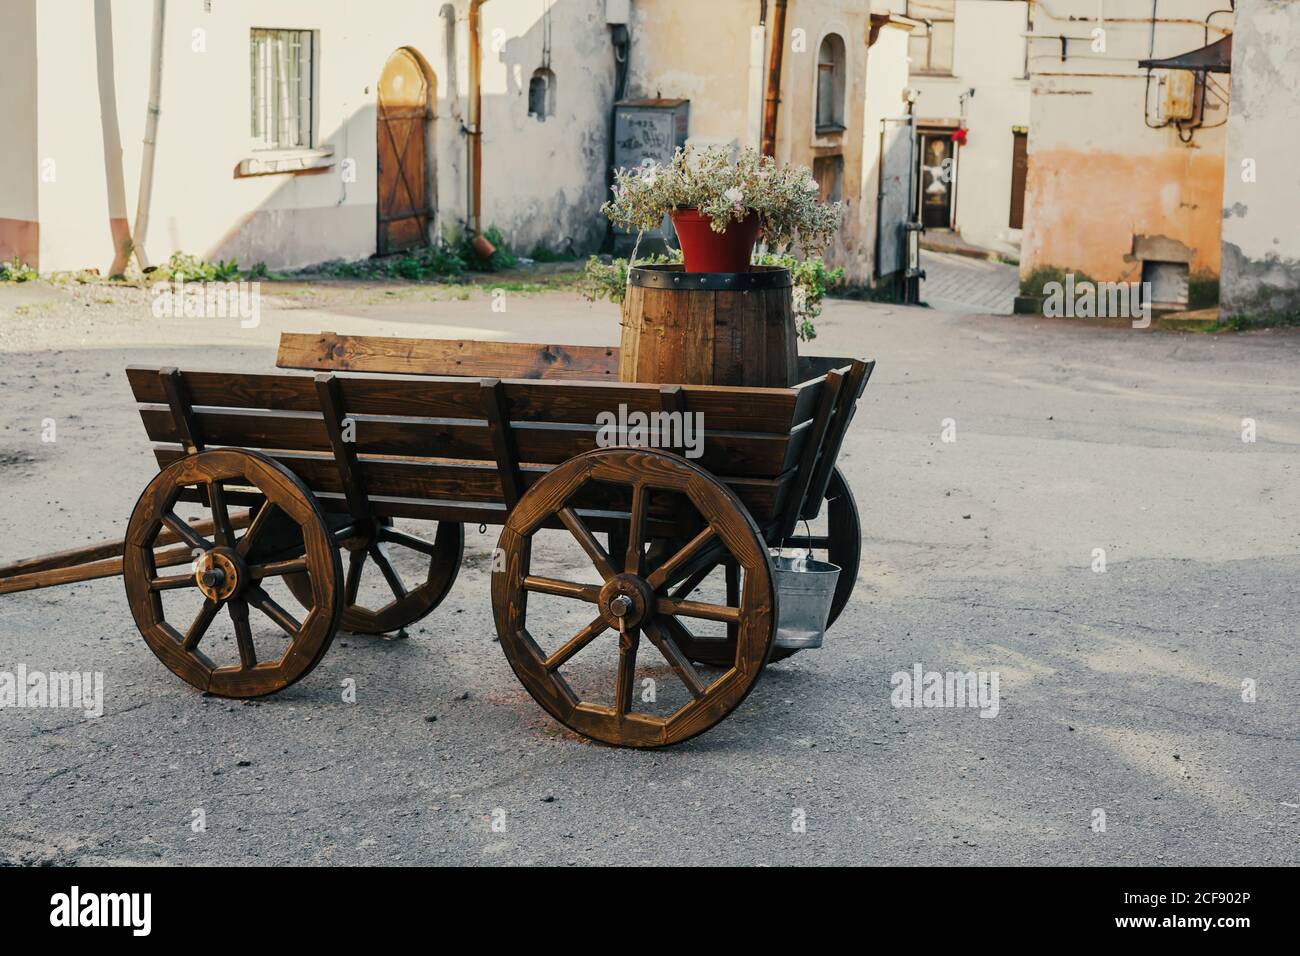 Wooden old-fashioned cart, decorative retro wagon in the yard, vintage stand for flowers, garden decor ideas Stock Photo